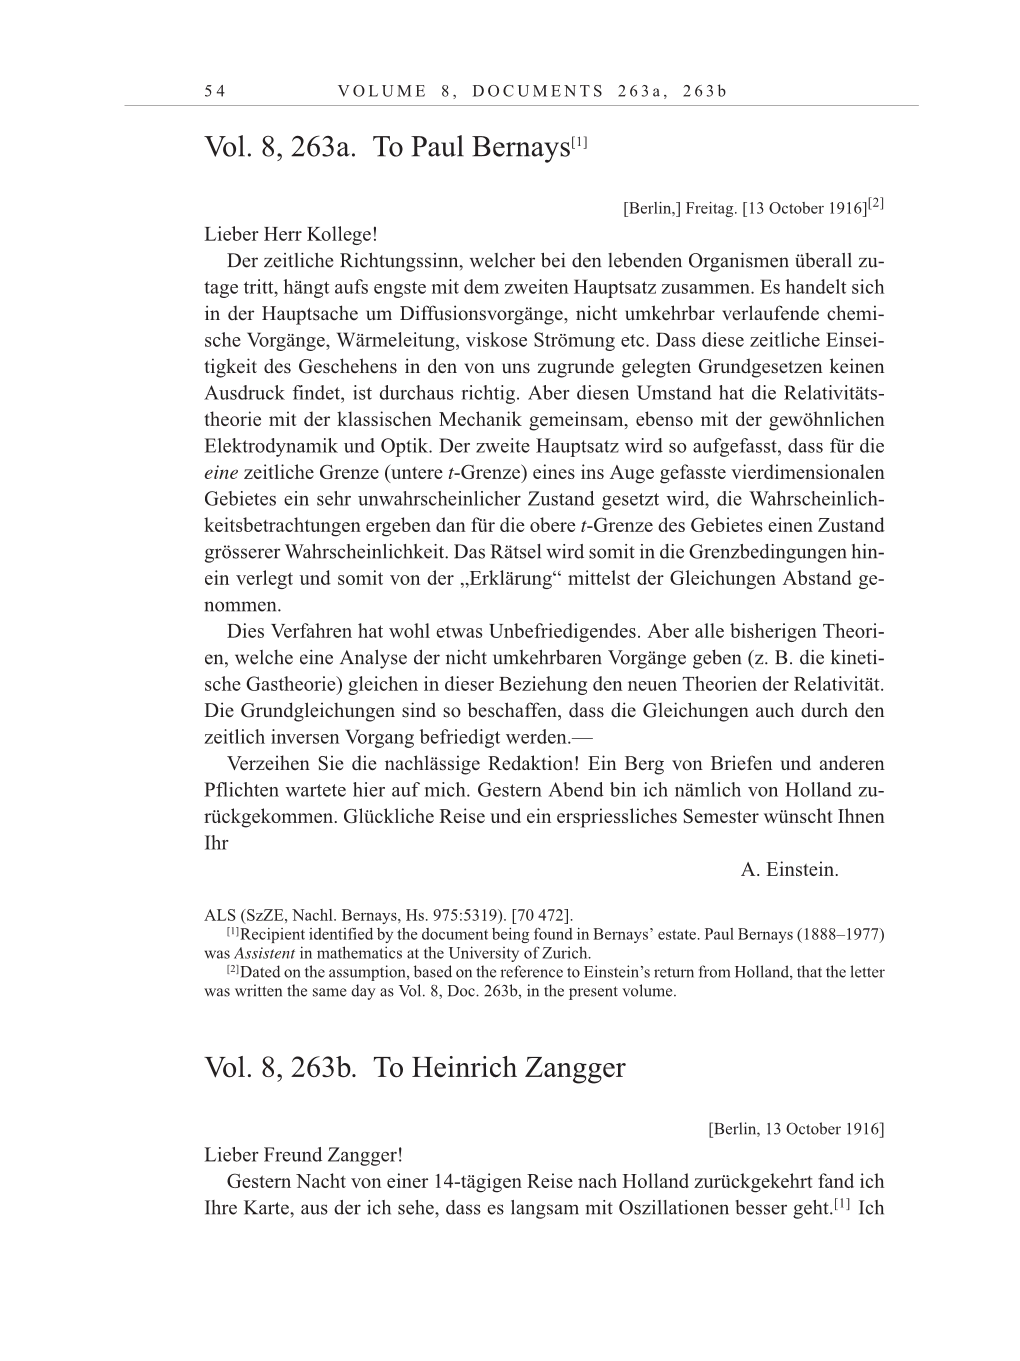 Volume 10: The Berlin Years: Correspondence May-December 1920 / Supplementary Correspondence 1909-1920 page 54